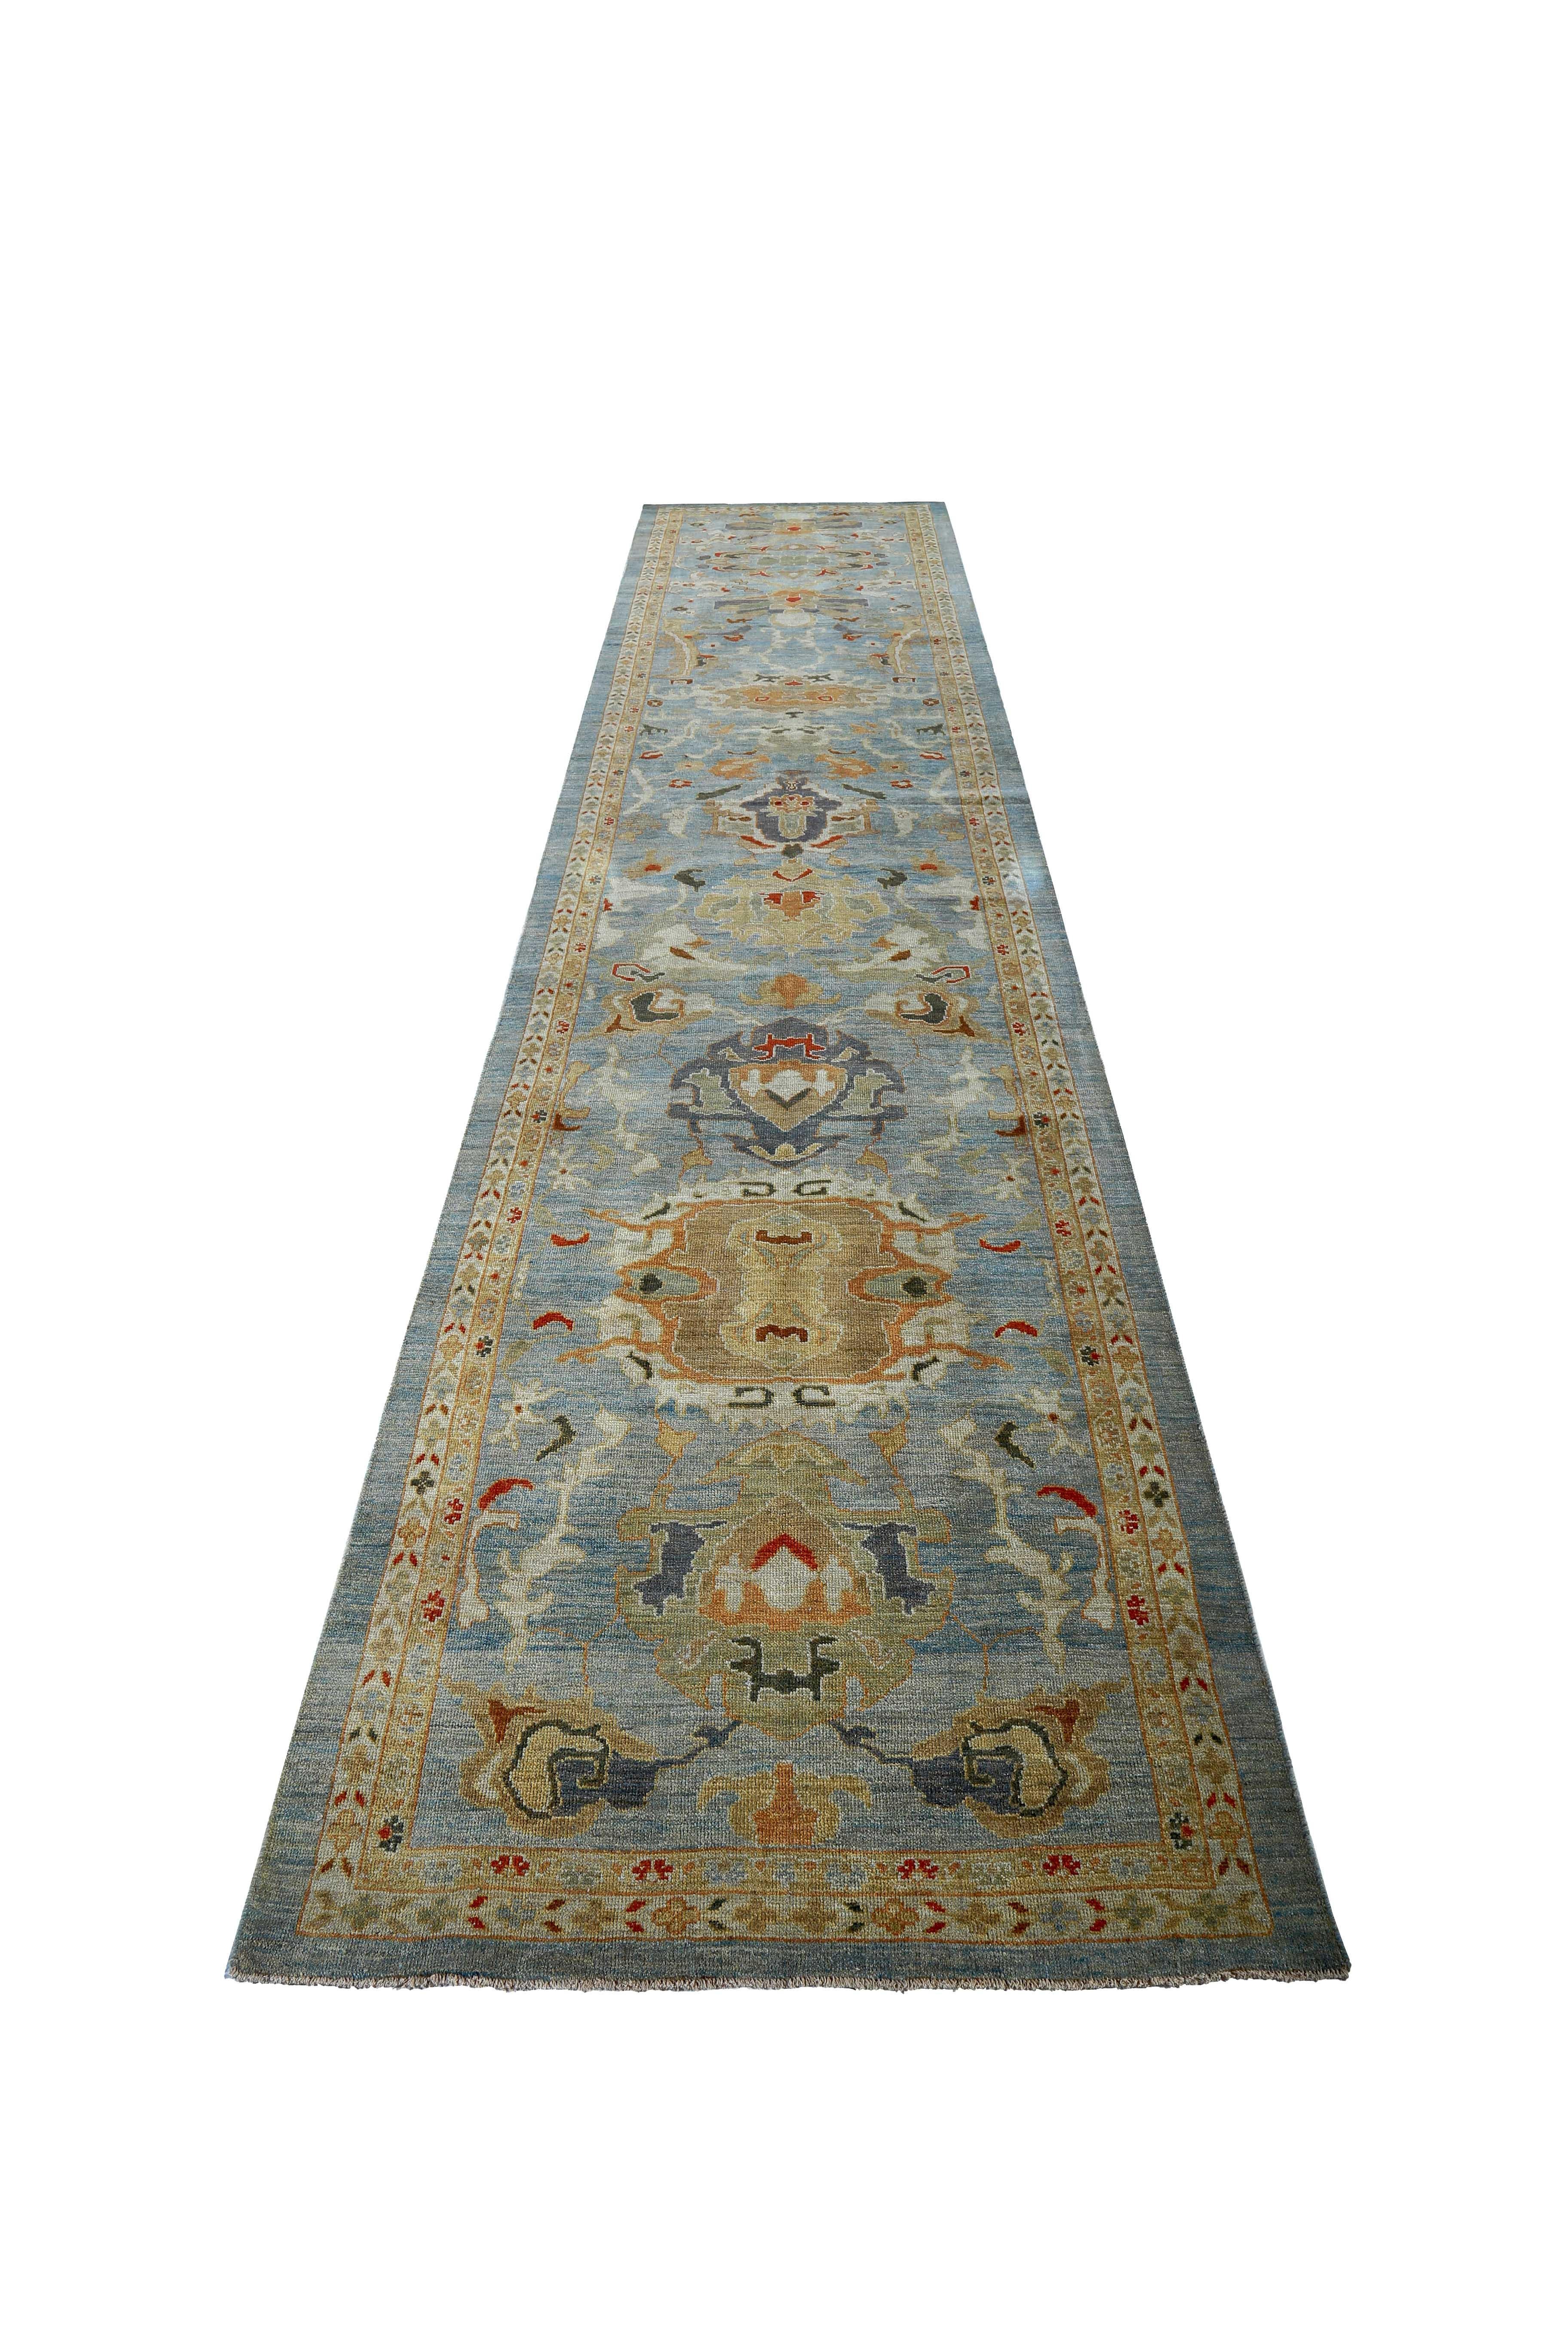 New handmade Turkish runner rug from high quality sheep’s wool and colored with eco-friendly vegetable dyes that are proven safe for humans and pets alike. It’s a classic Sultanabad design showcasing a lovely blue field with prominent Herati flower